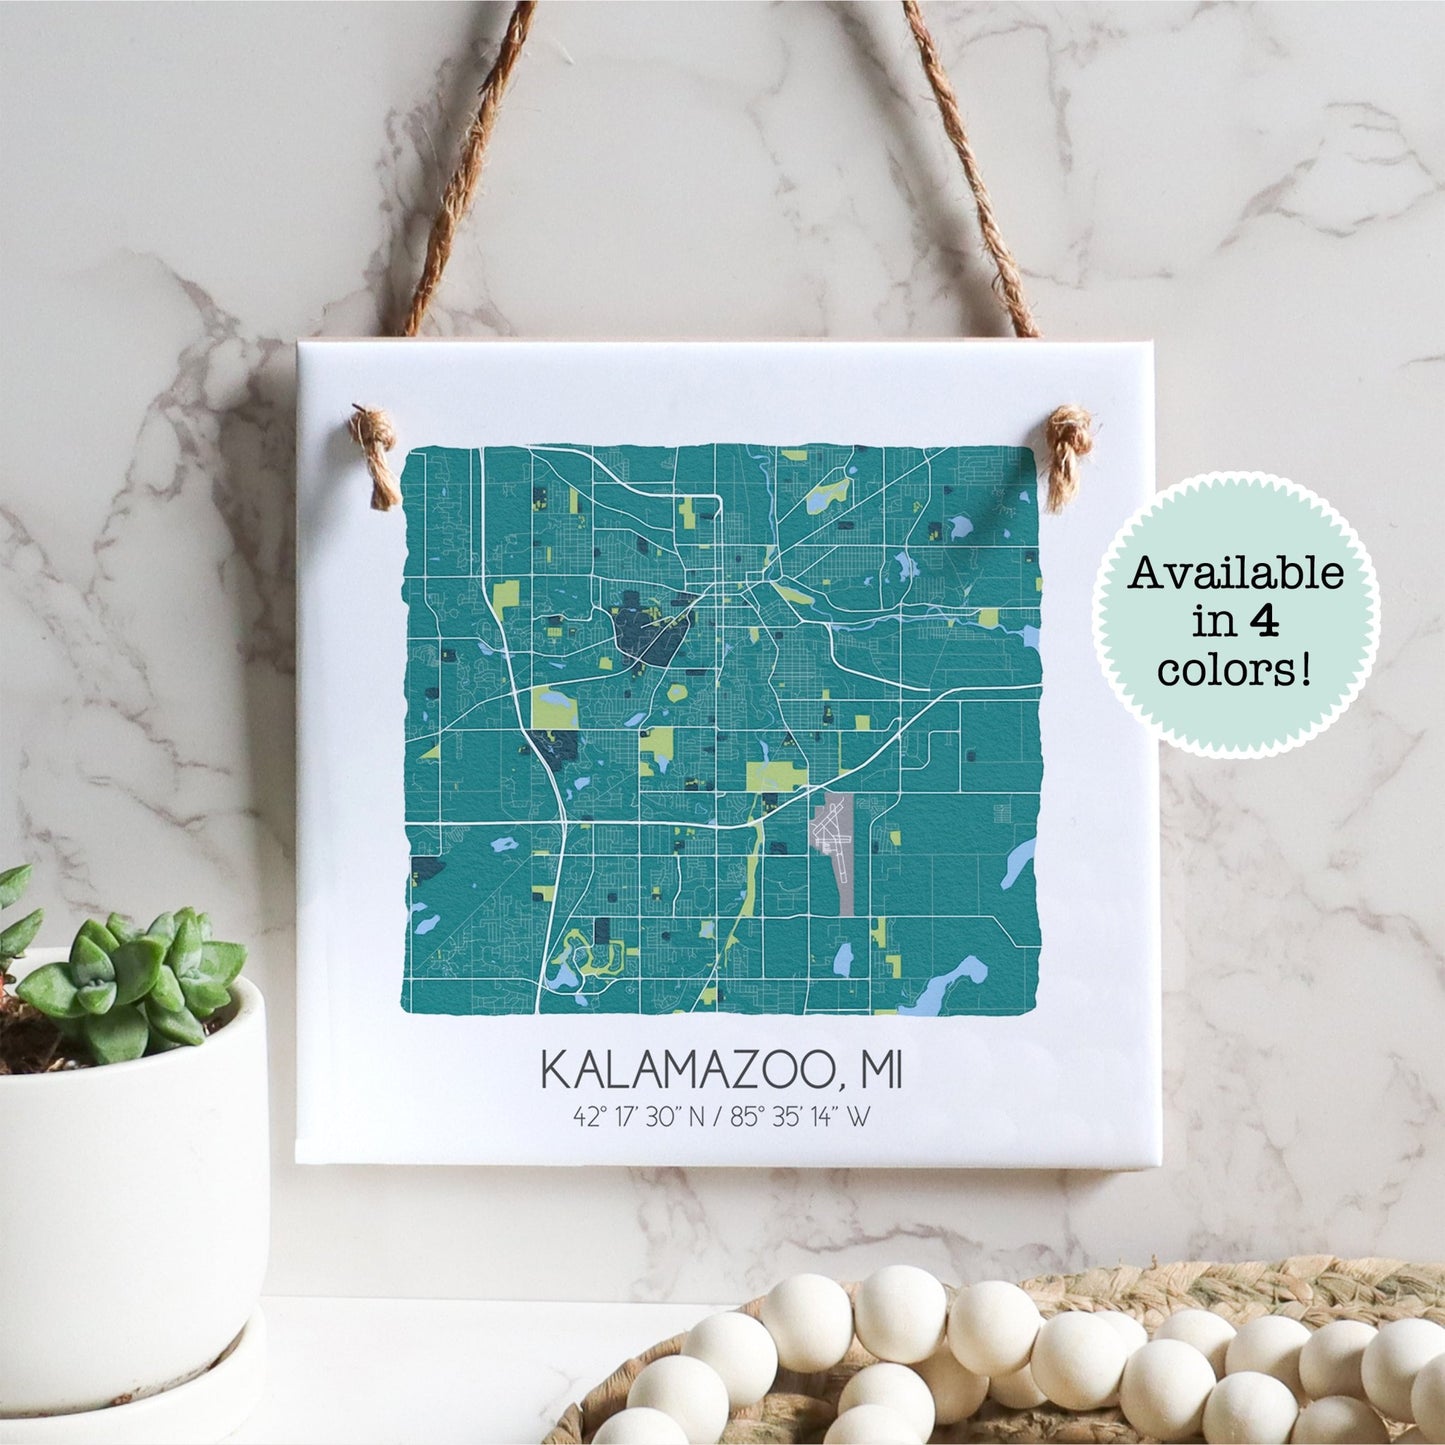 A city map of Kalamazoo Michigan on a square ceramic tile sign hanging on a wall - Sparks House Co